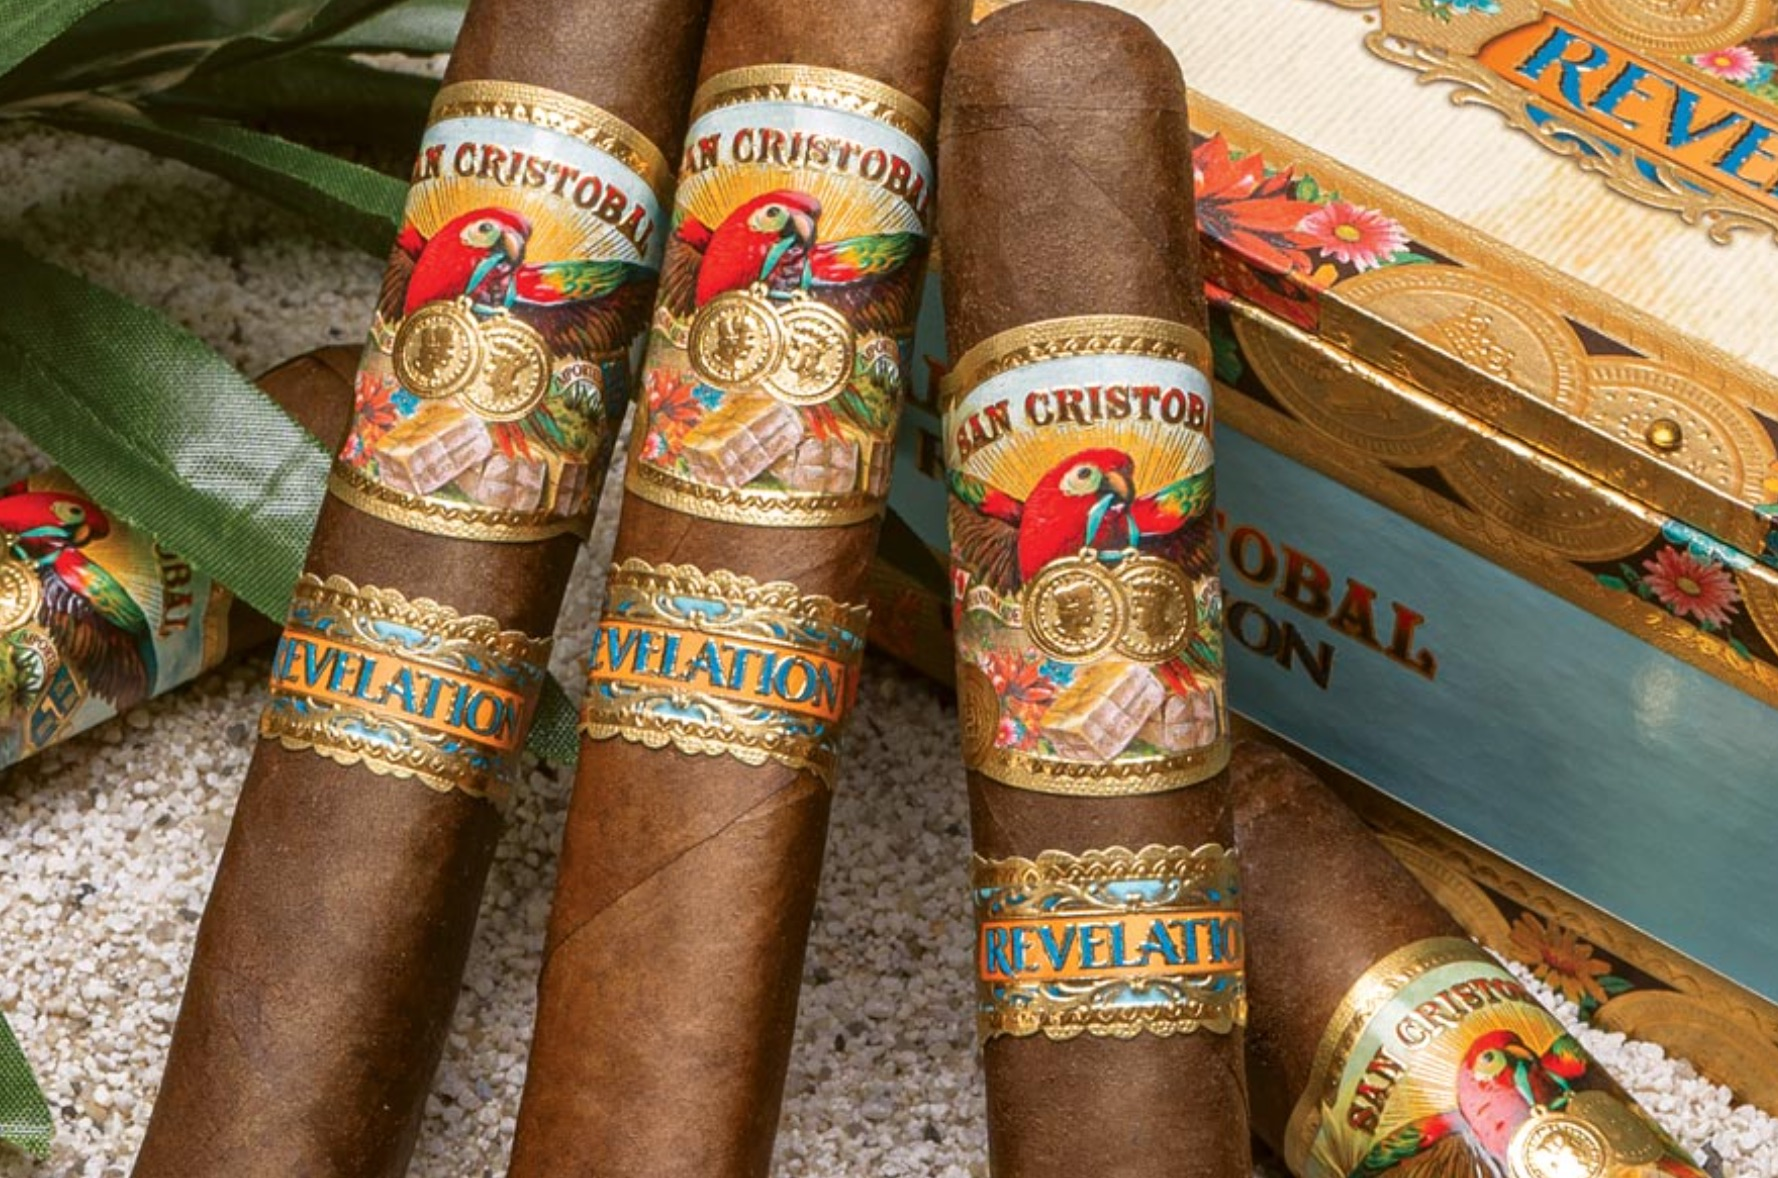 A picture of a San Cristobal Revelation Legend cigar with a Cuban tradition label